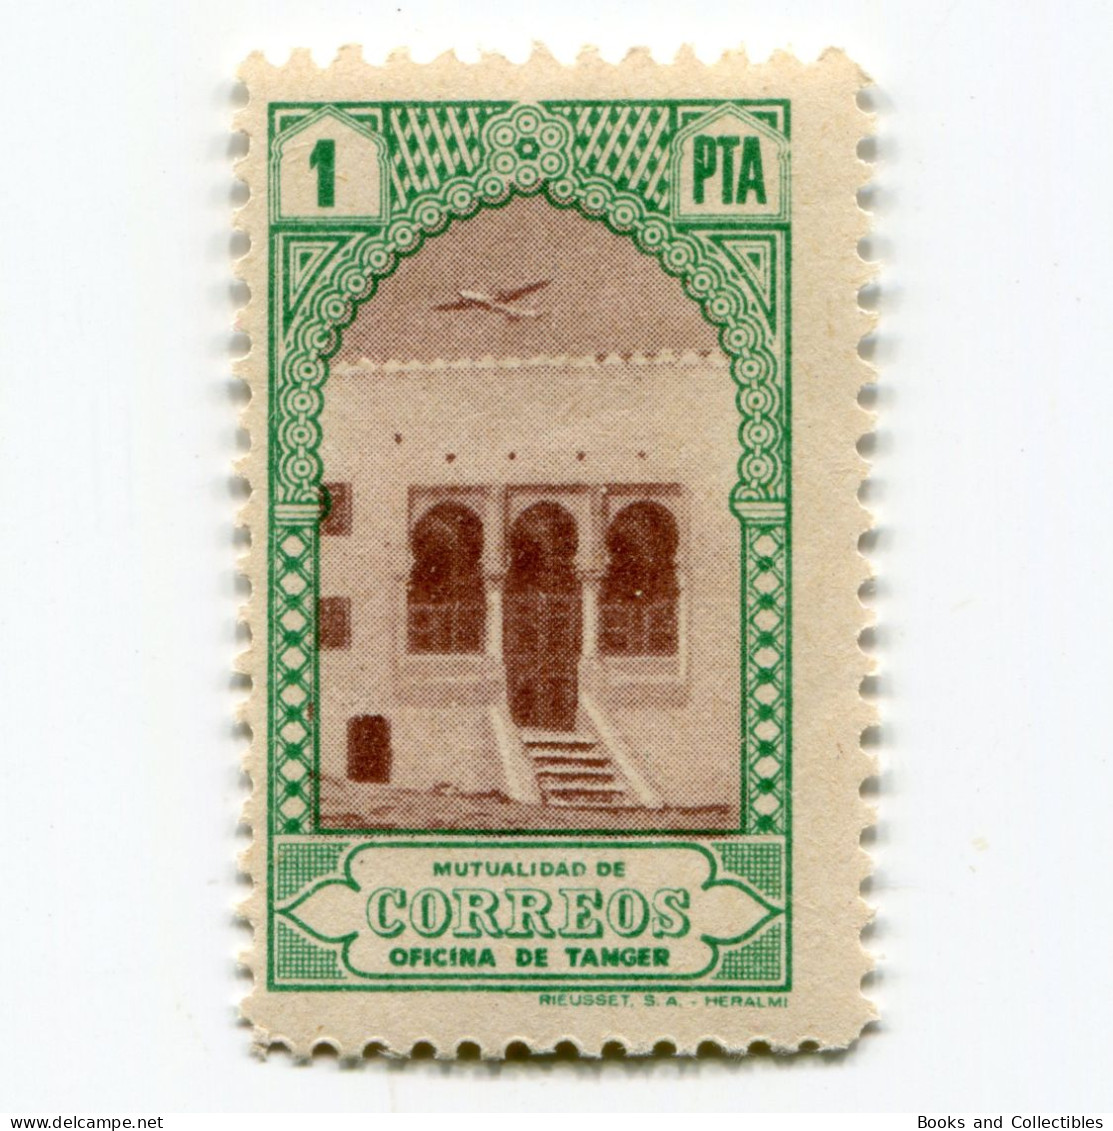 [FBL ● A-01] SPANISH TANGIER - 1946 - Beneficent Stamps - 1 Pta - Edifil ES-TNG BE26 - Bienfaisance